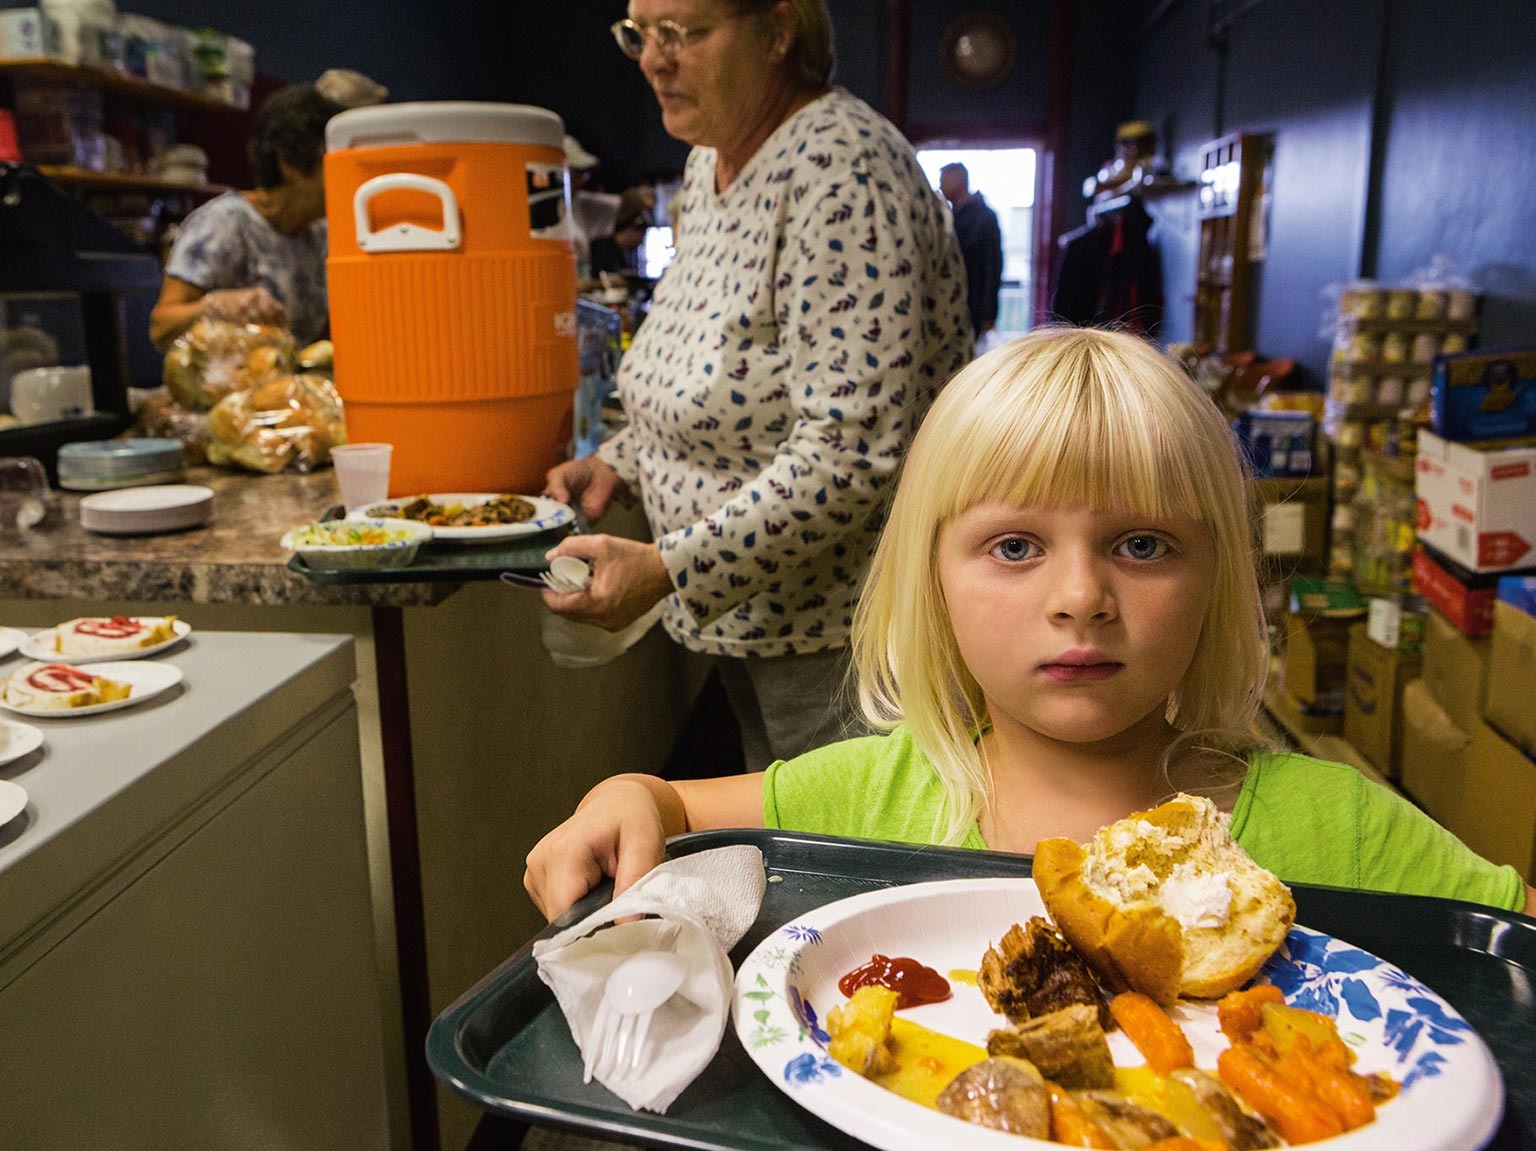 Child and mother use food bank in Iowa, USA